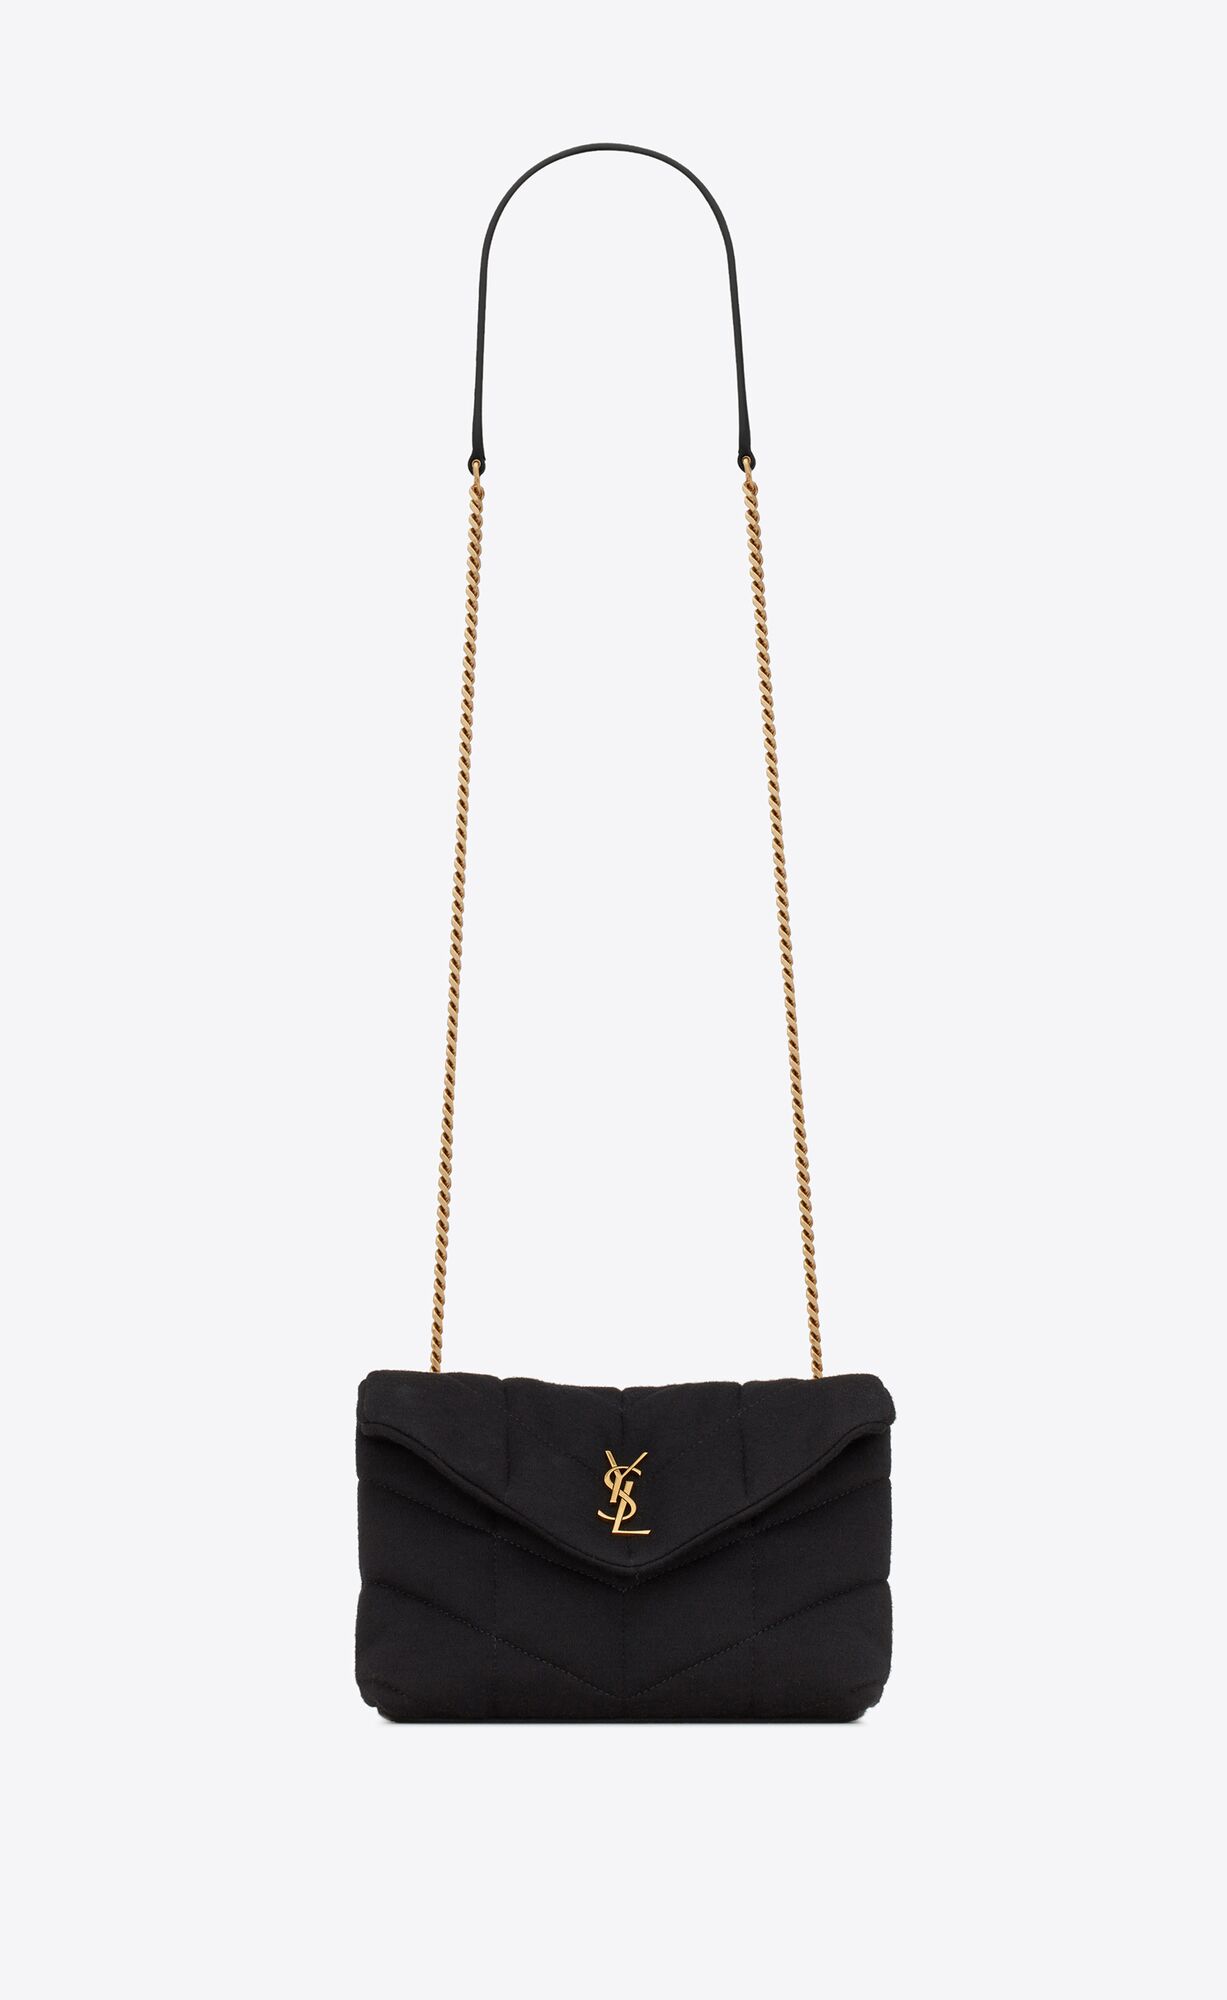 Saint Laurent Puffer Toy Bag In Jersey – Black – 6203332F9471000